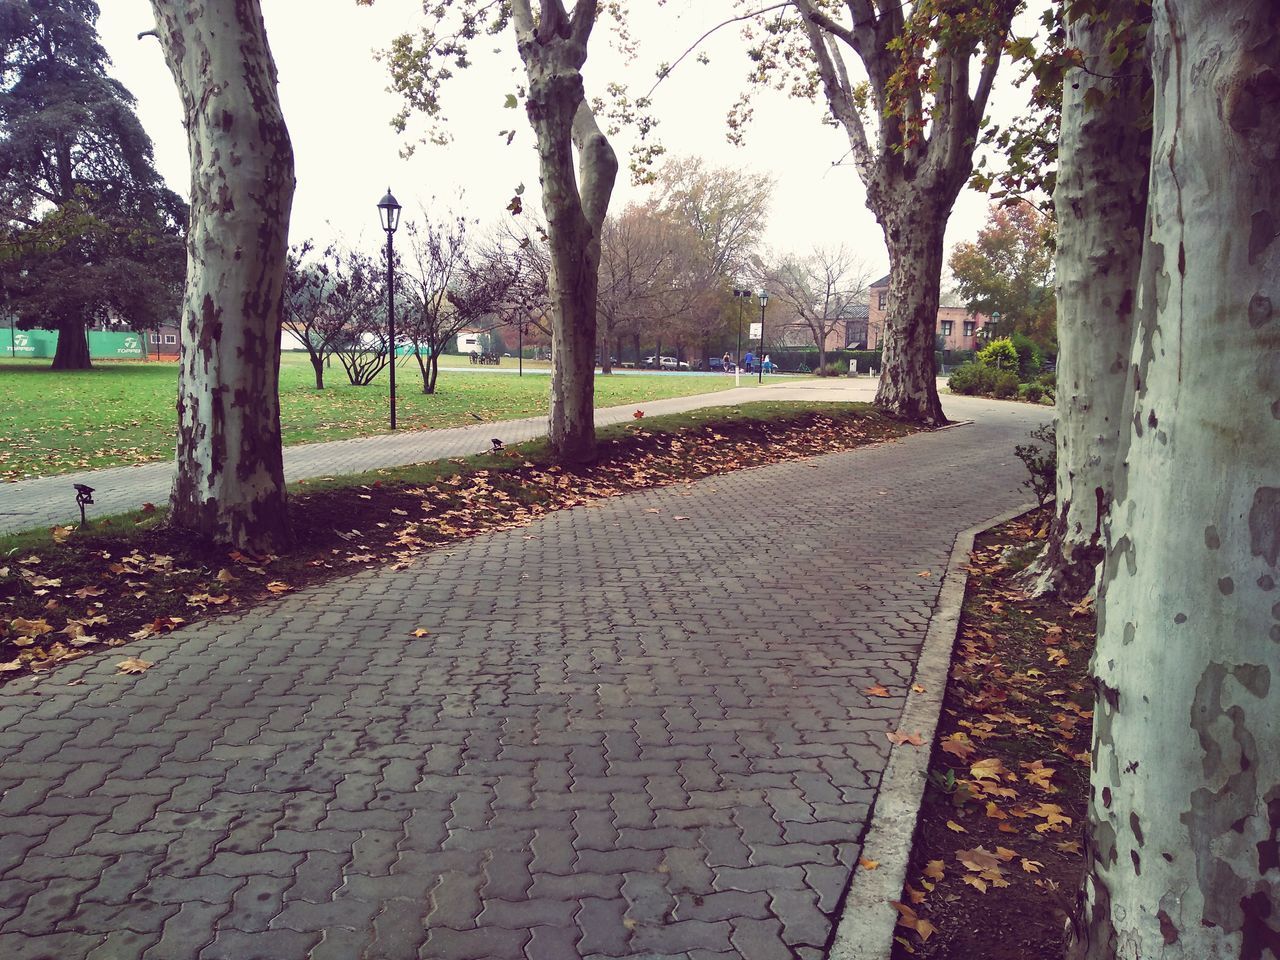 tree, plant, footpath, park, tree trunk, nature, trunk, the way forward, park - man made space, day, no people, cobblestone, street, growth, outdoors, beauty in nature, city, tranquility, autumn, architecture, treelined, plant part, walkway, diminishing perspective, road, stone, leaf, tranquil scene, empty, paving stone